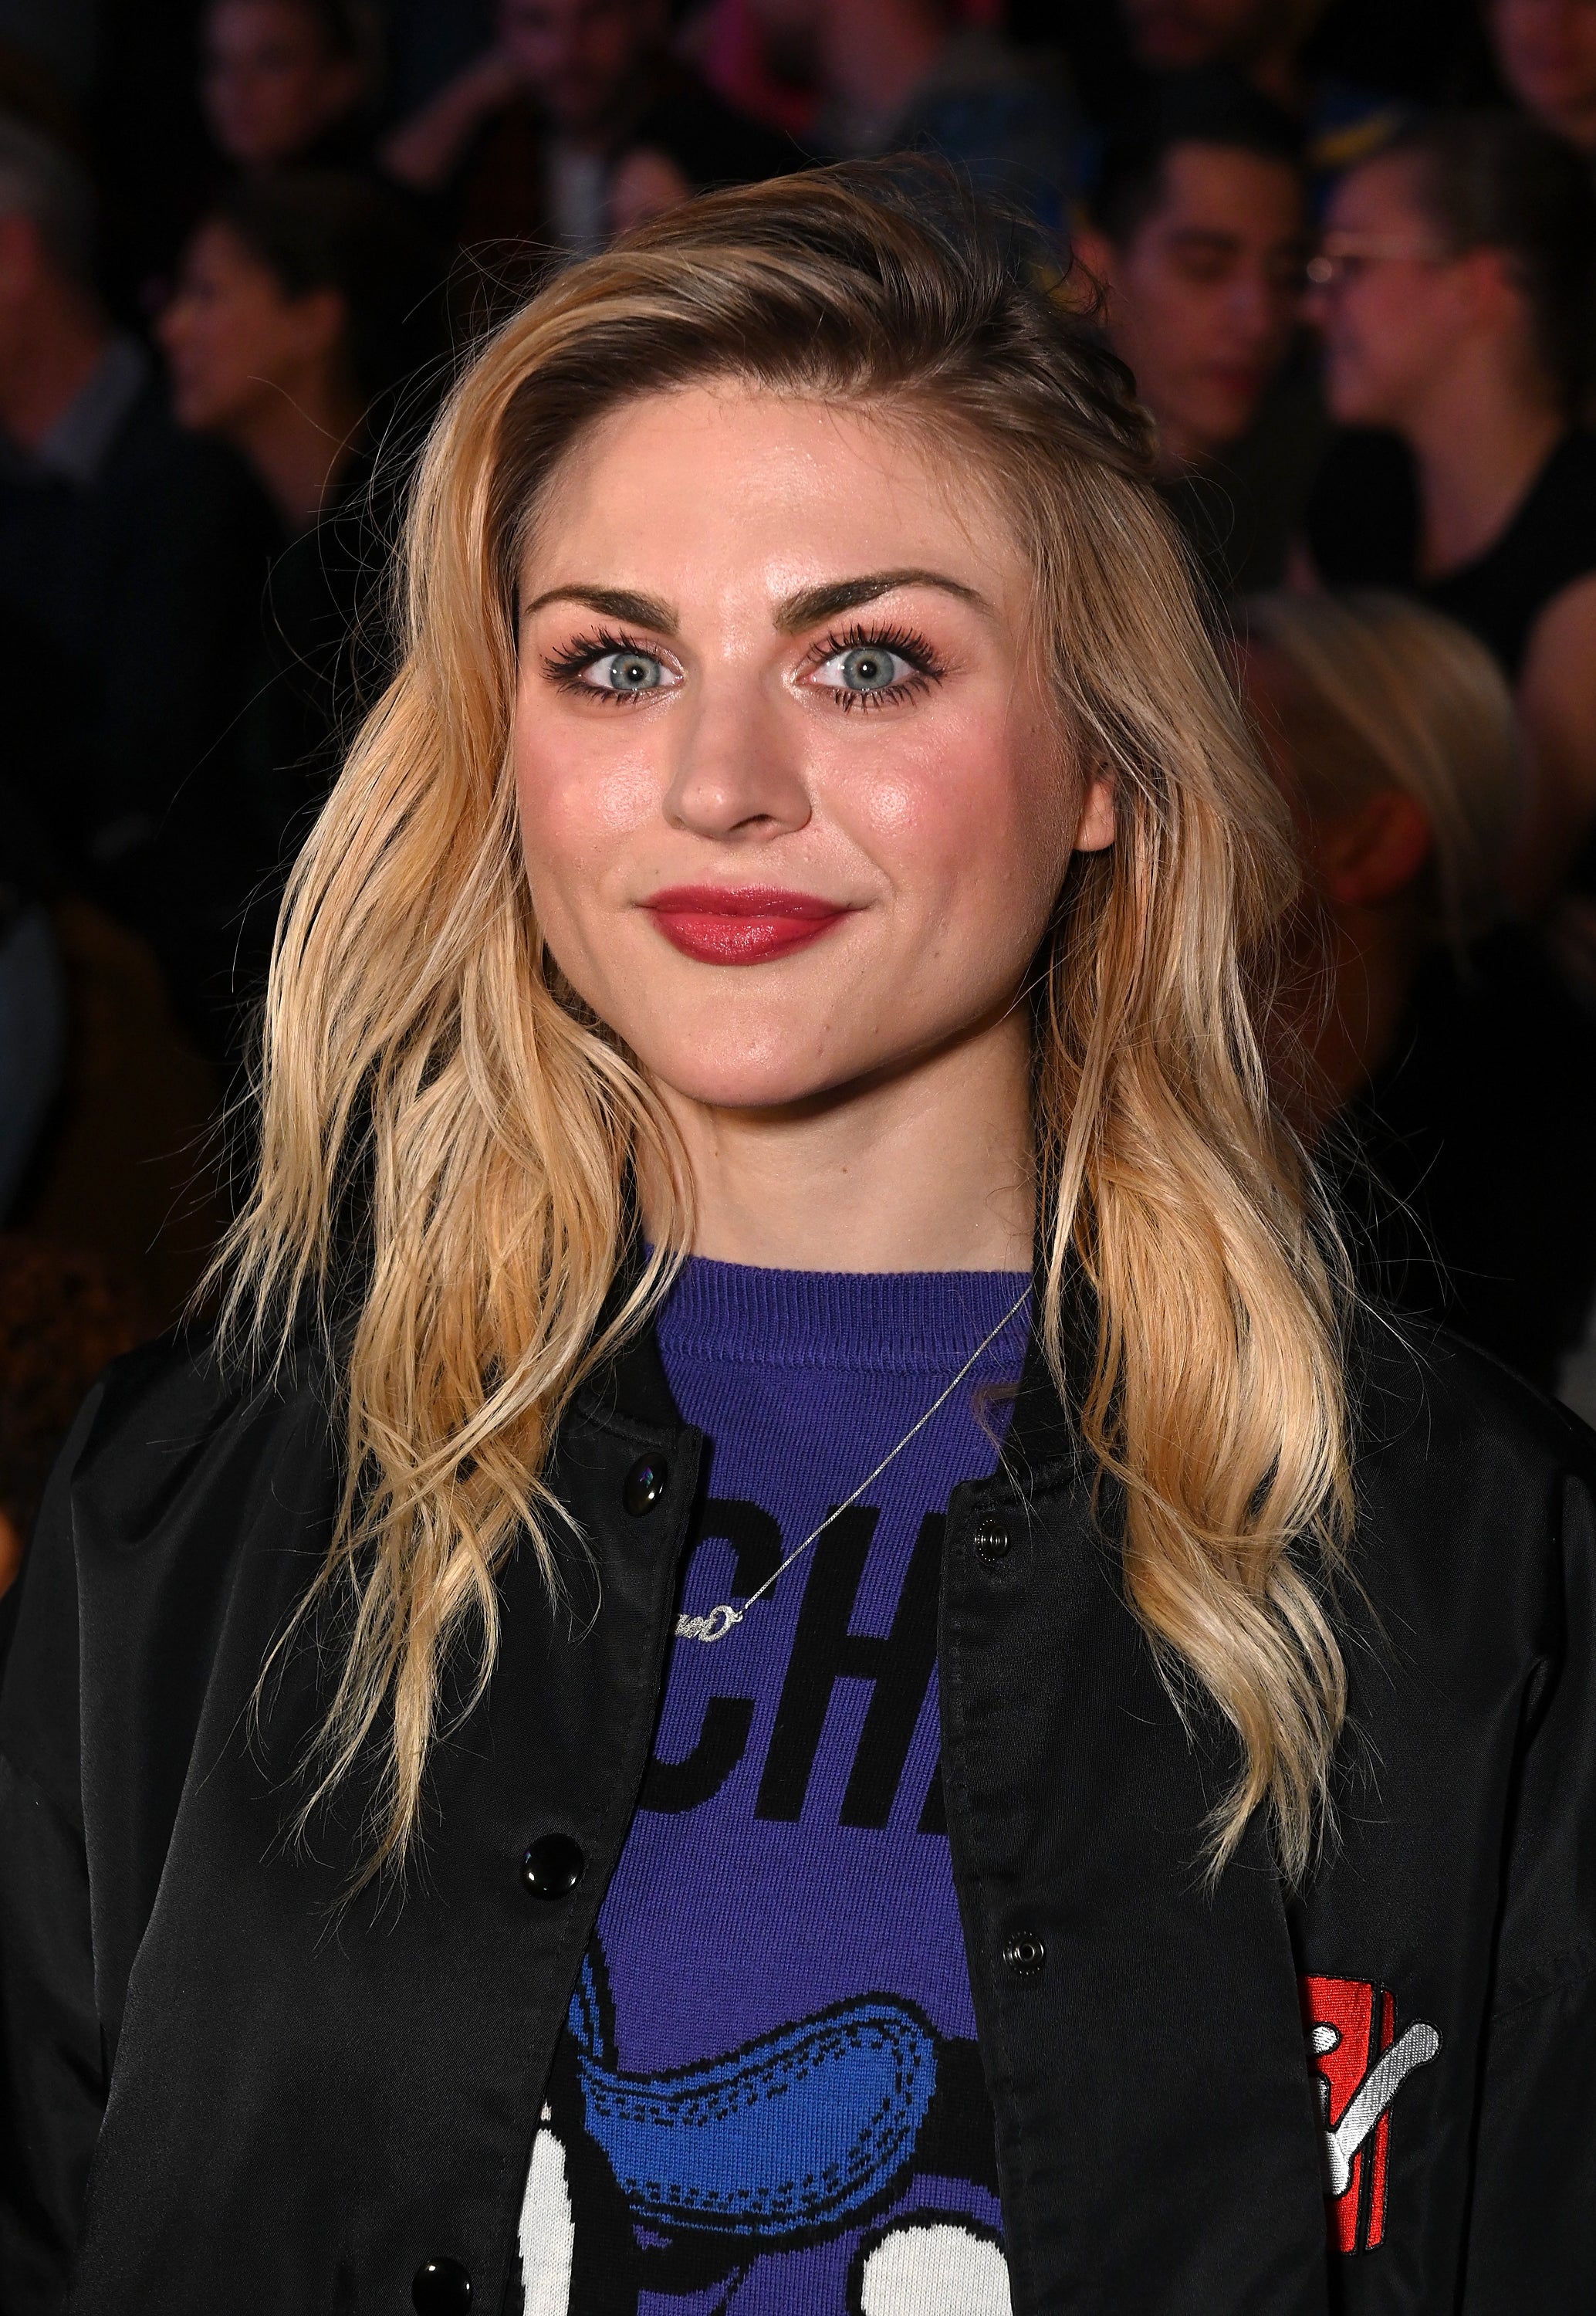 Frances Bean Cobain attends the Moschino x H&M - Front Row at Pier 36 on October 24, 2018 in New York City.